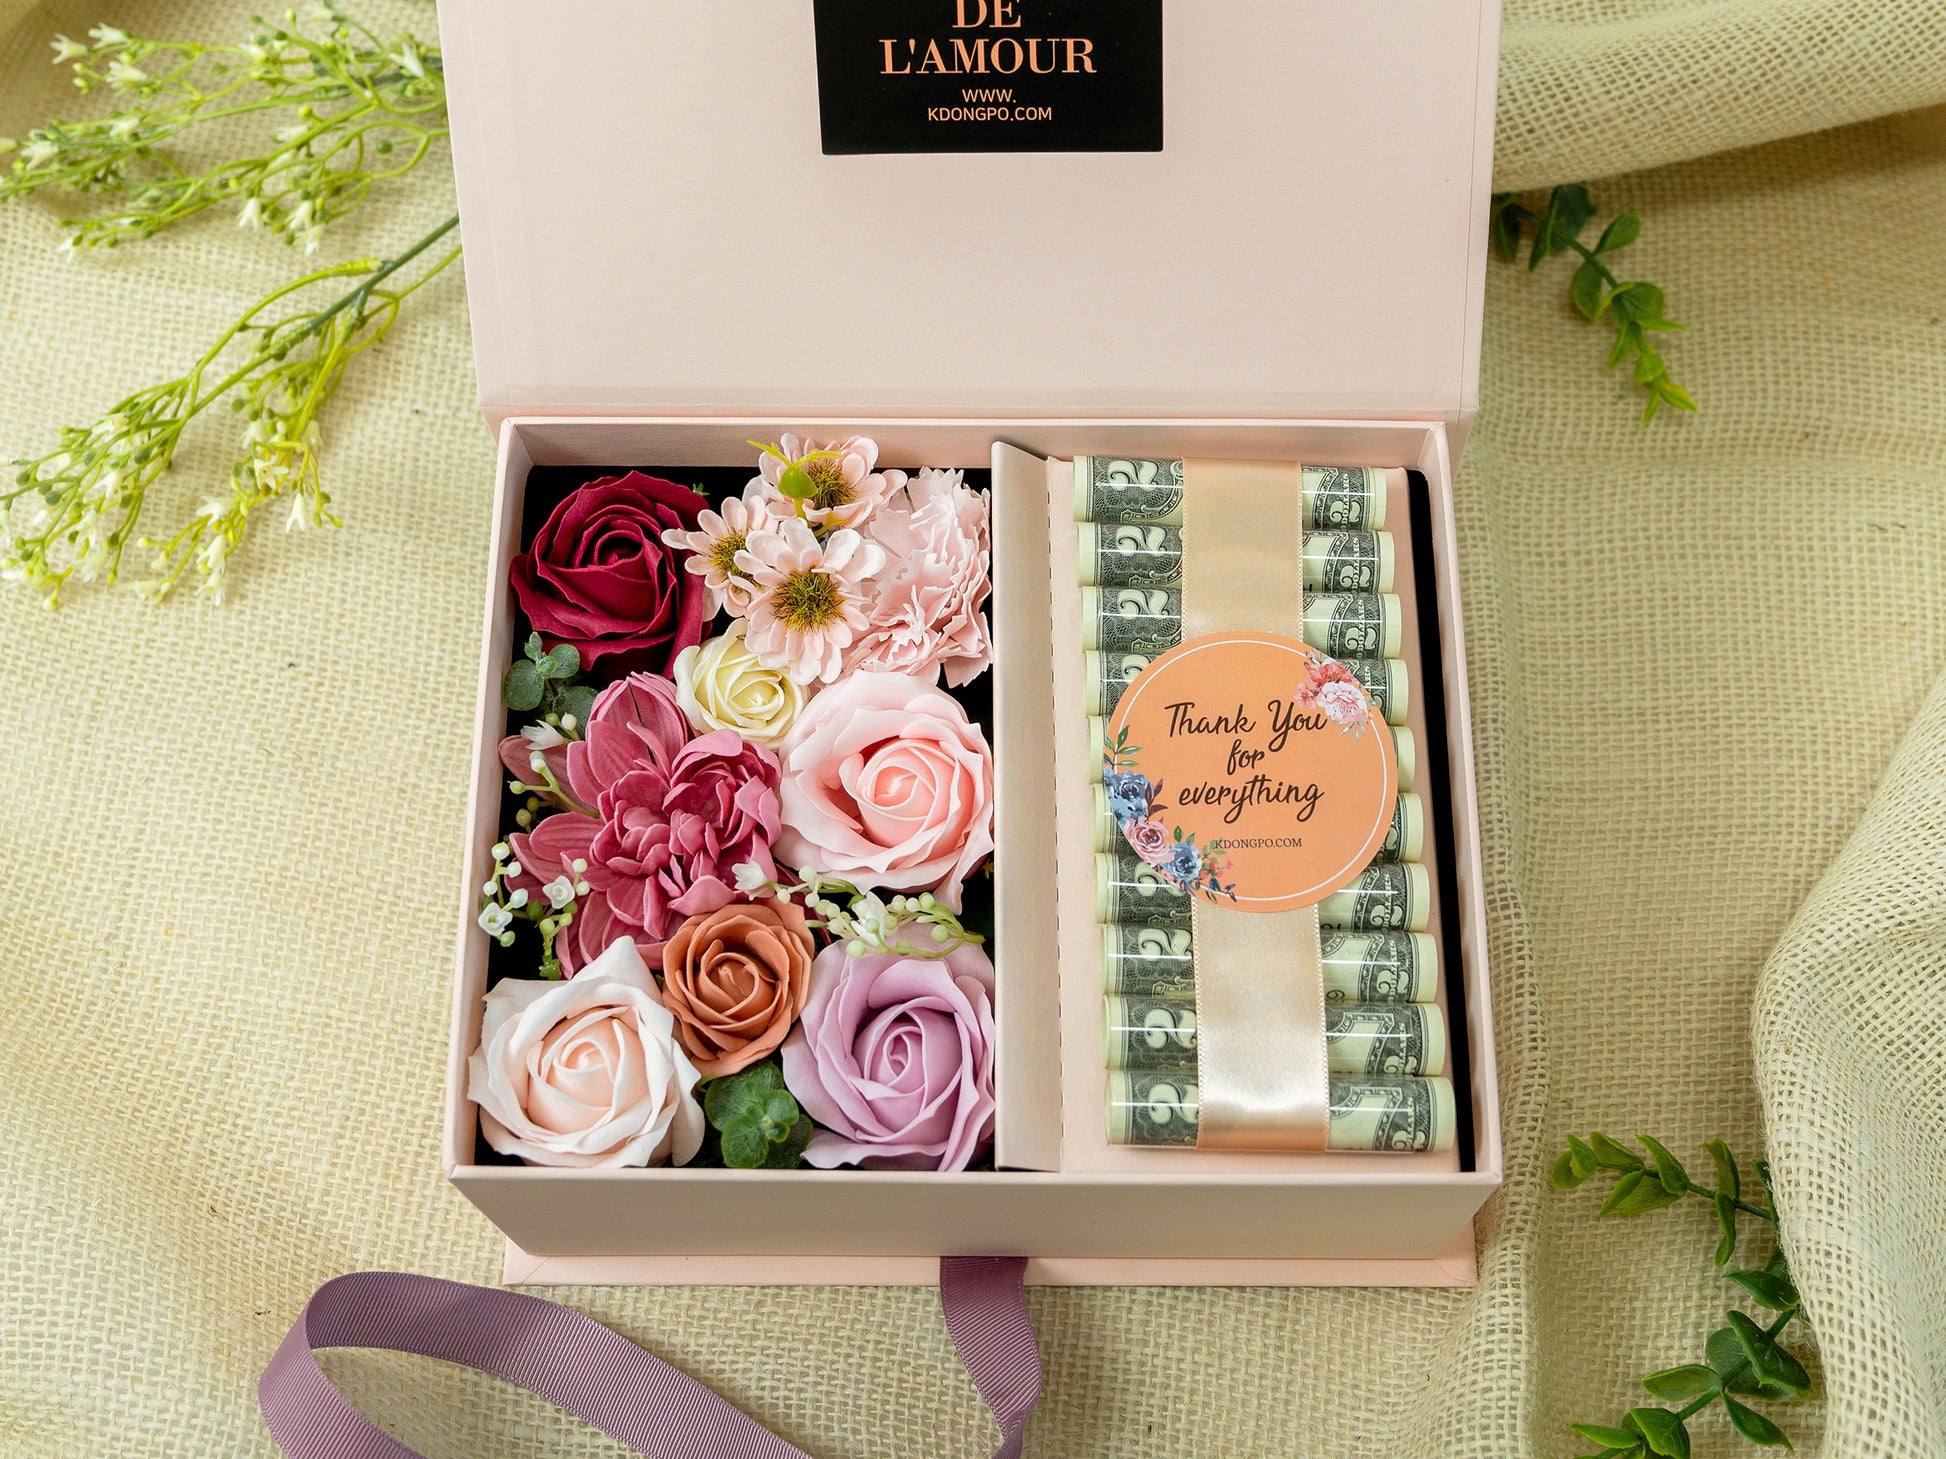 Soap Rose Mix Chocolate With Balloon Box - Happy21 Online Florist's Flower  on